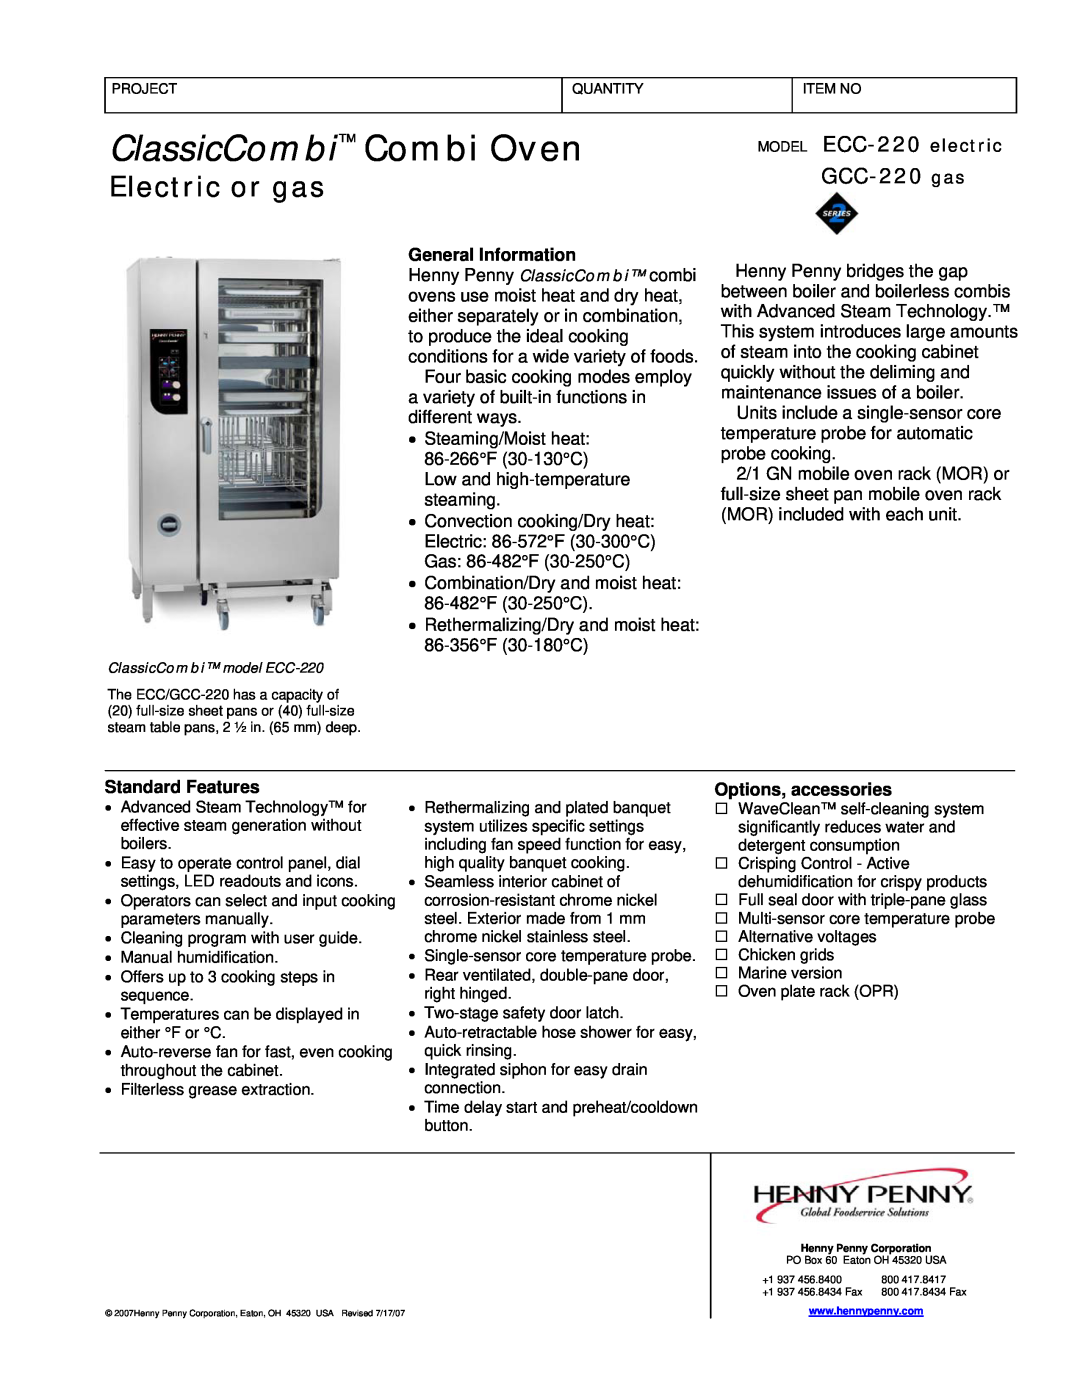 Henny Penny GCC-220 gas manual MODEL ECC-220 electric, ClassicCombi Combi Oven, Electric or gas, General Information 